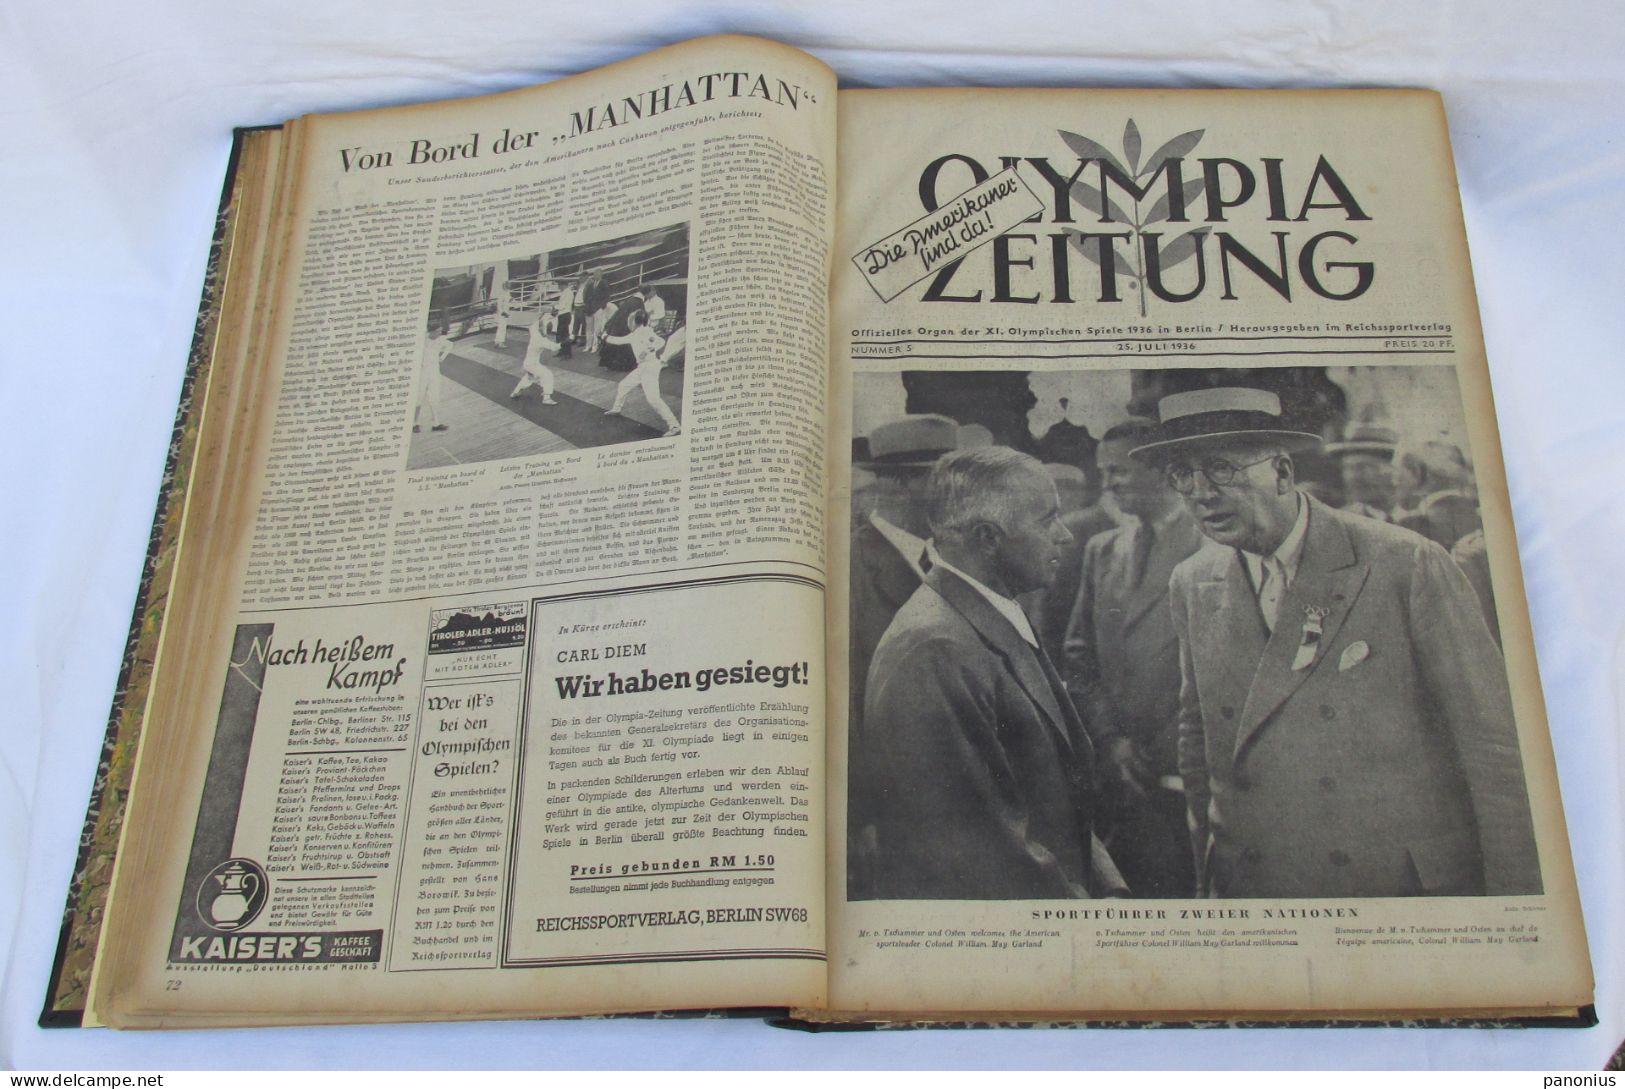 OLYMPIA ZEITUNG NEWSPAPER OLYMPIC GAMES BERLIN GERMANY 1936 SET 30 NUMBERS!!!